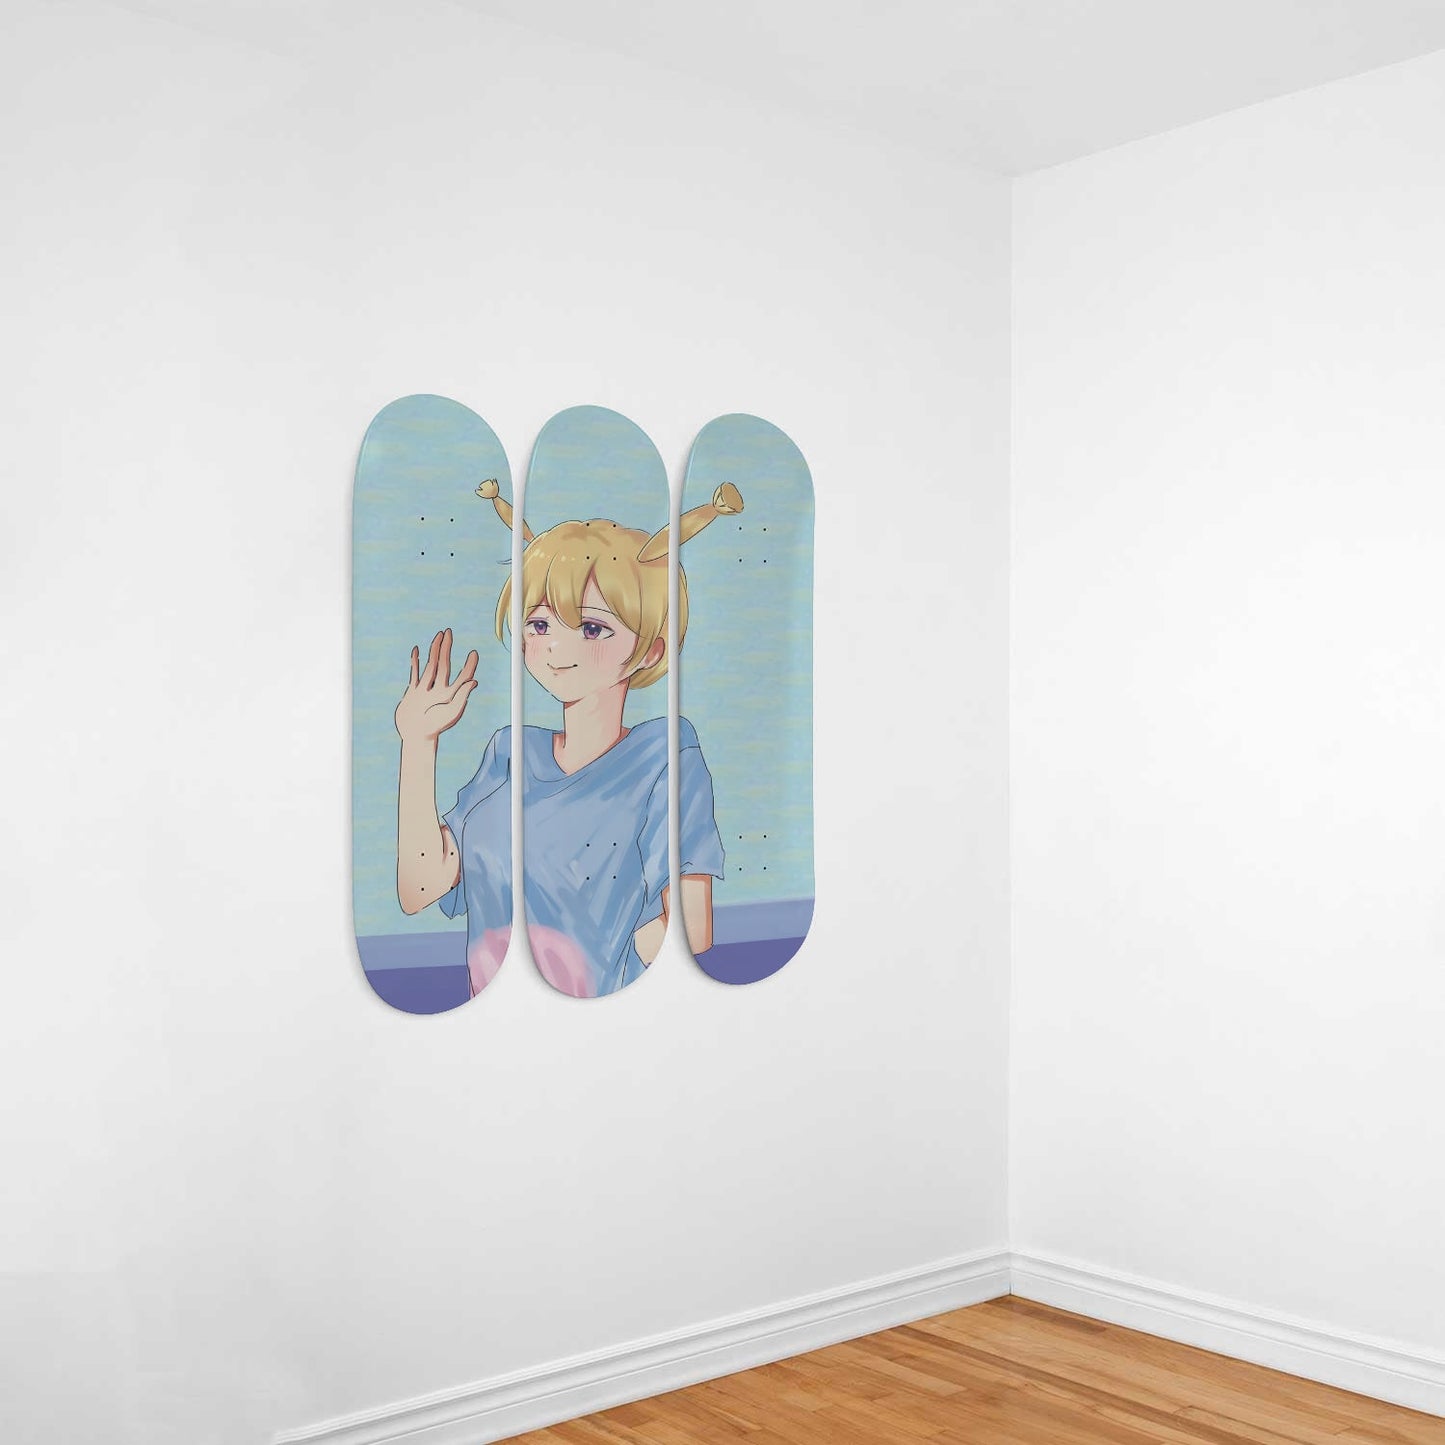 Commission by Vic #2.0 - Skater Wall